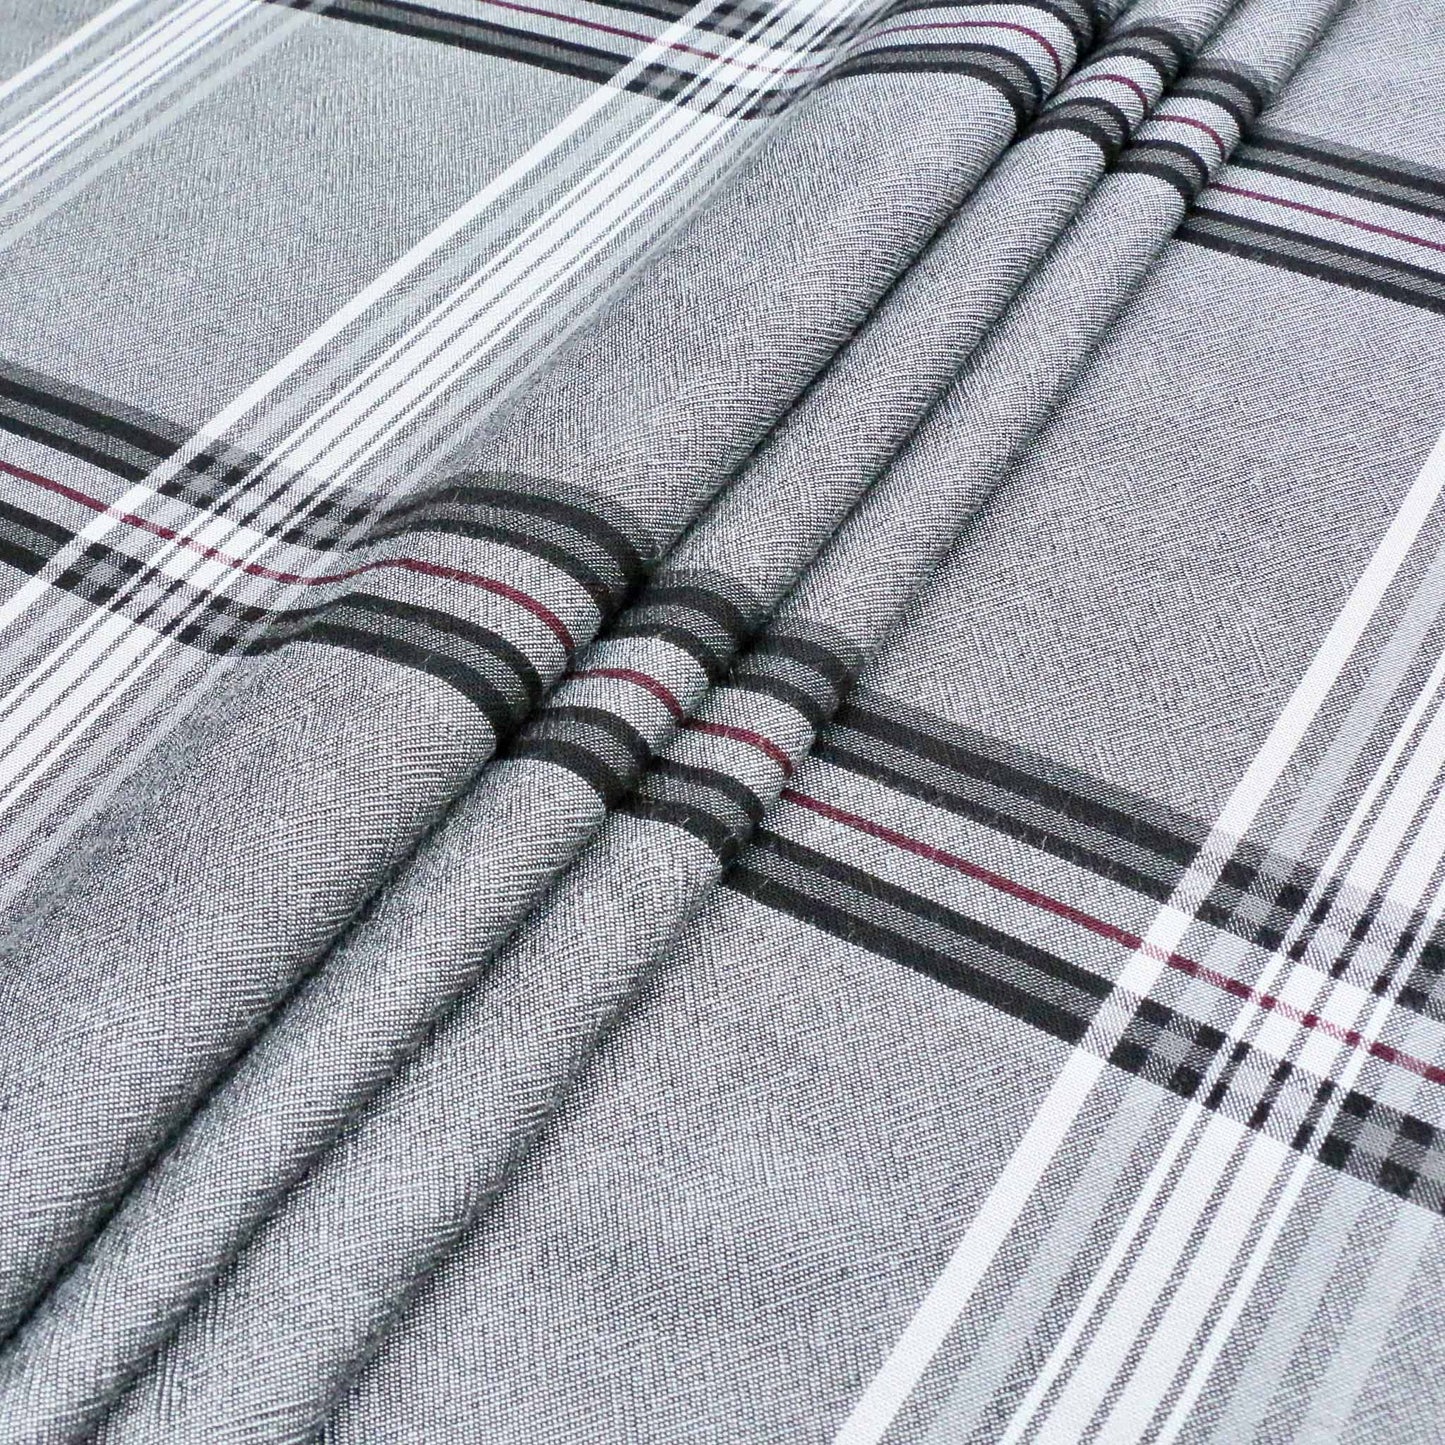 check patterned viscose challis dressmaking rayon fabric in grey white and black